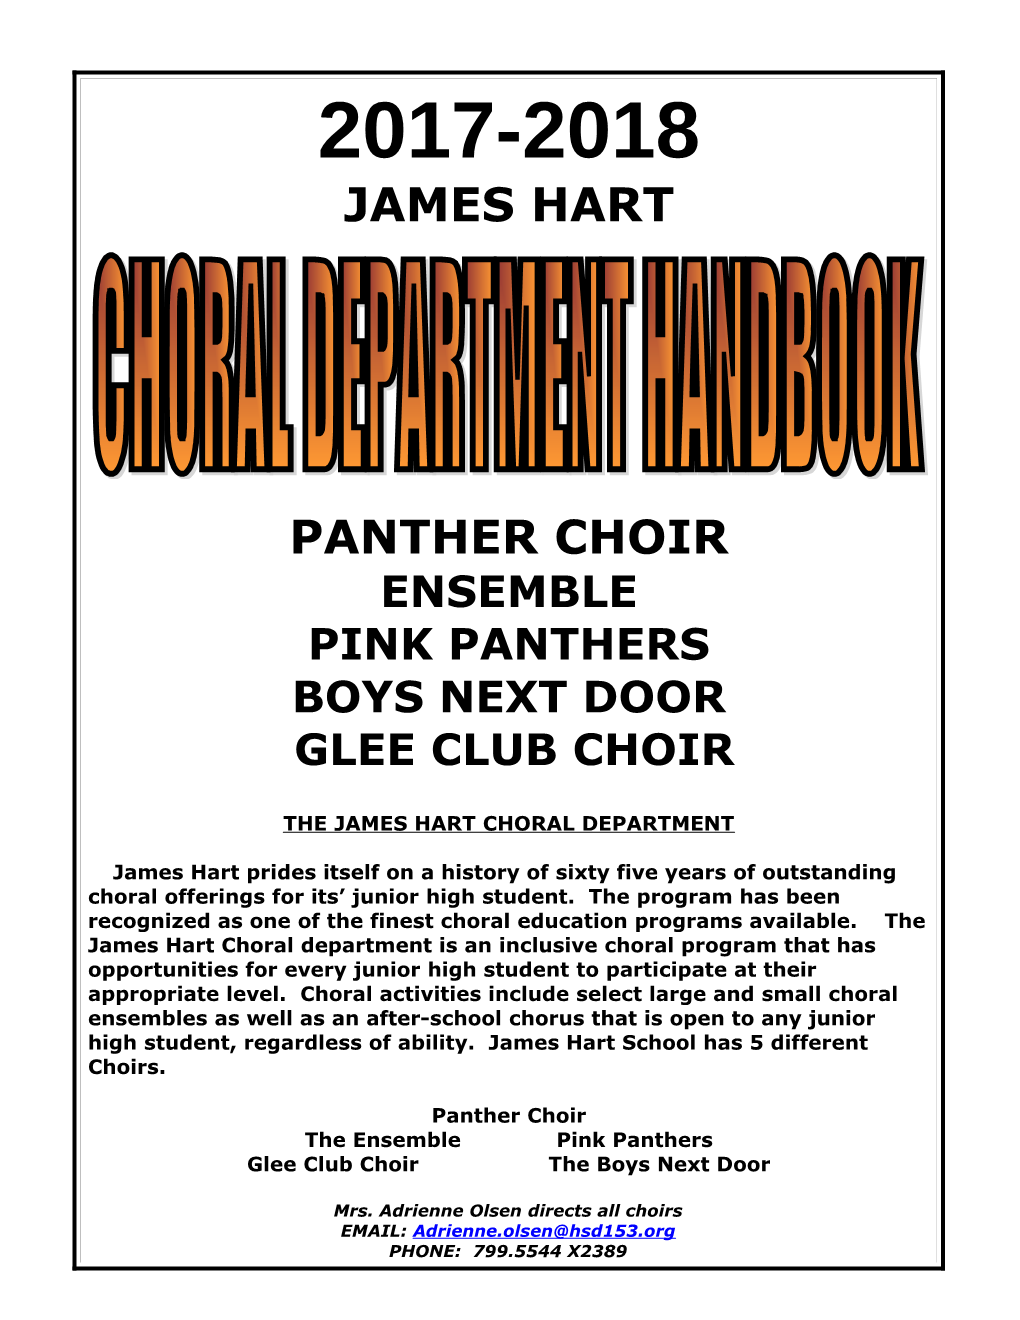 The James Hart Choral Department